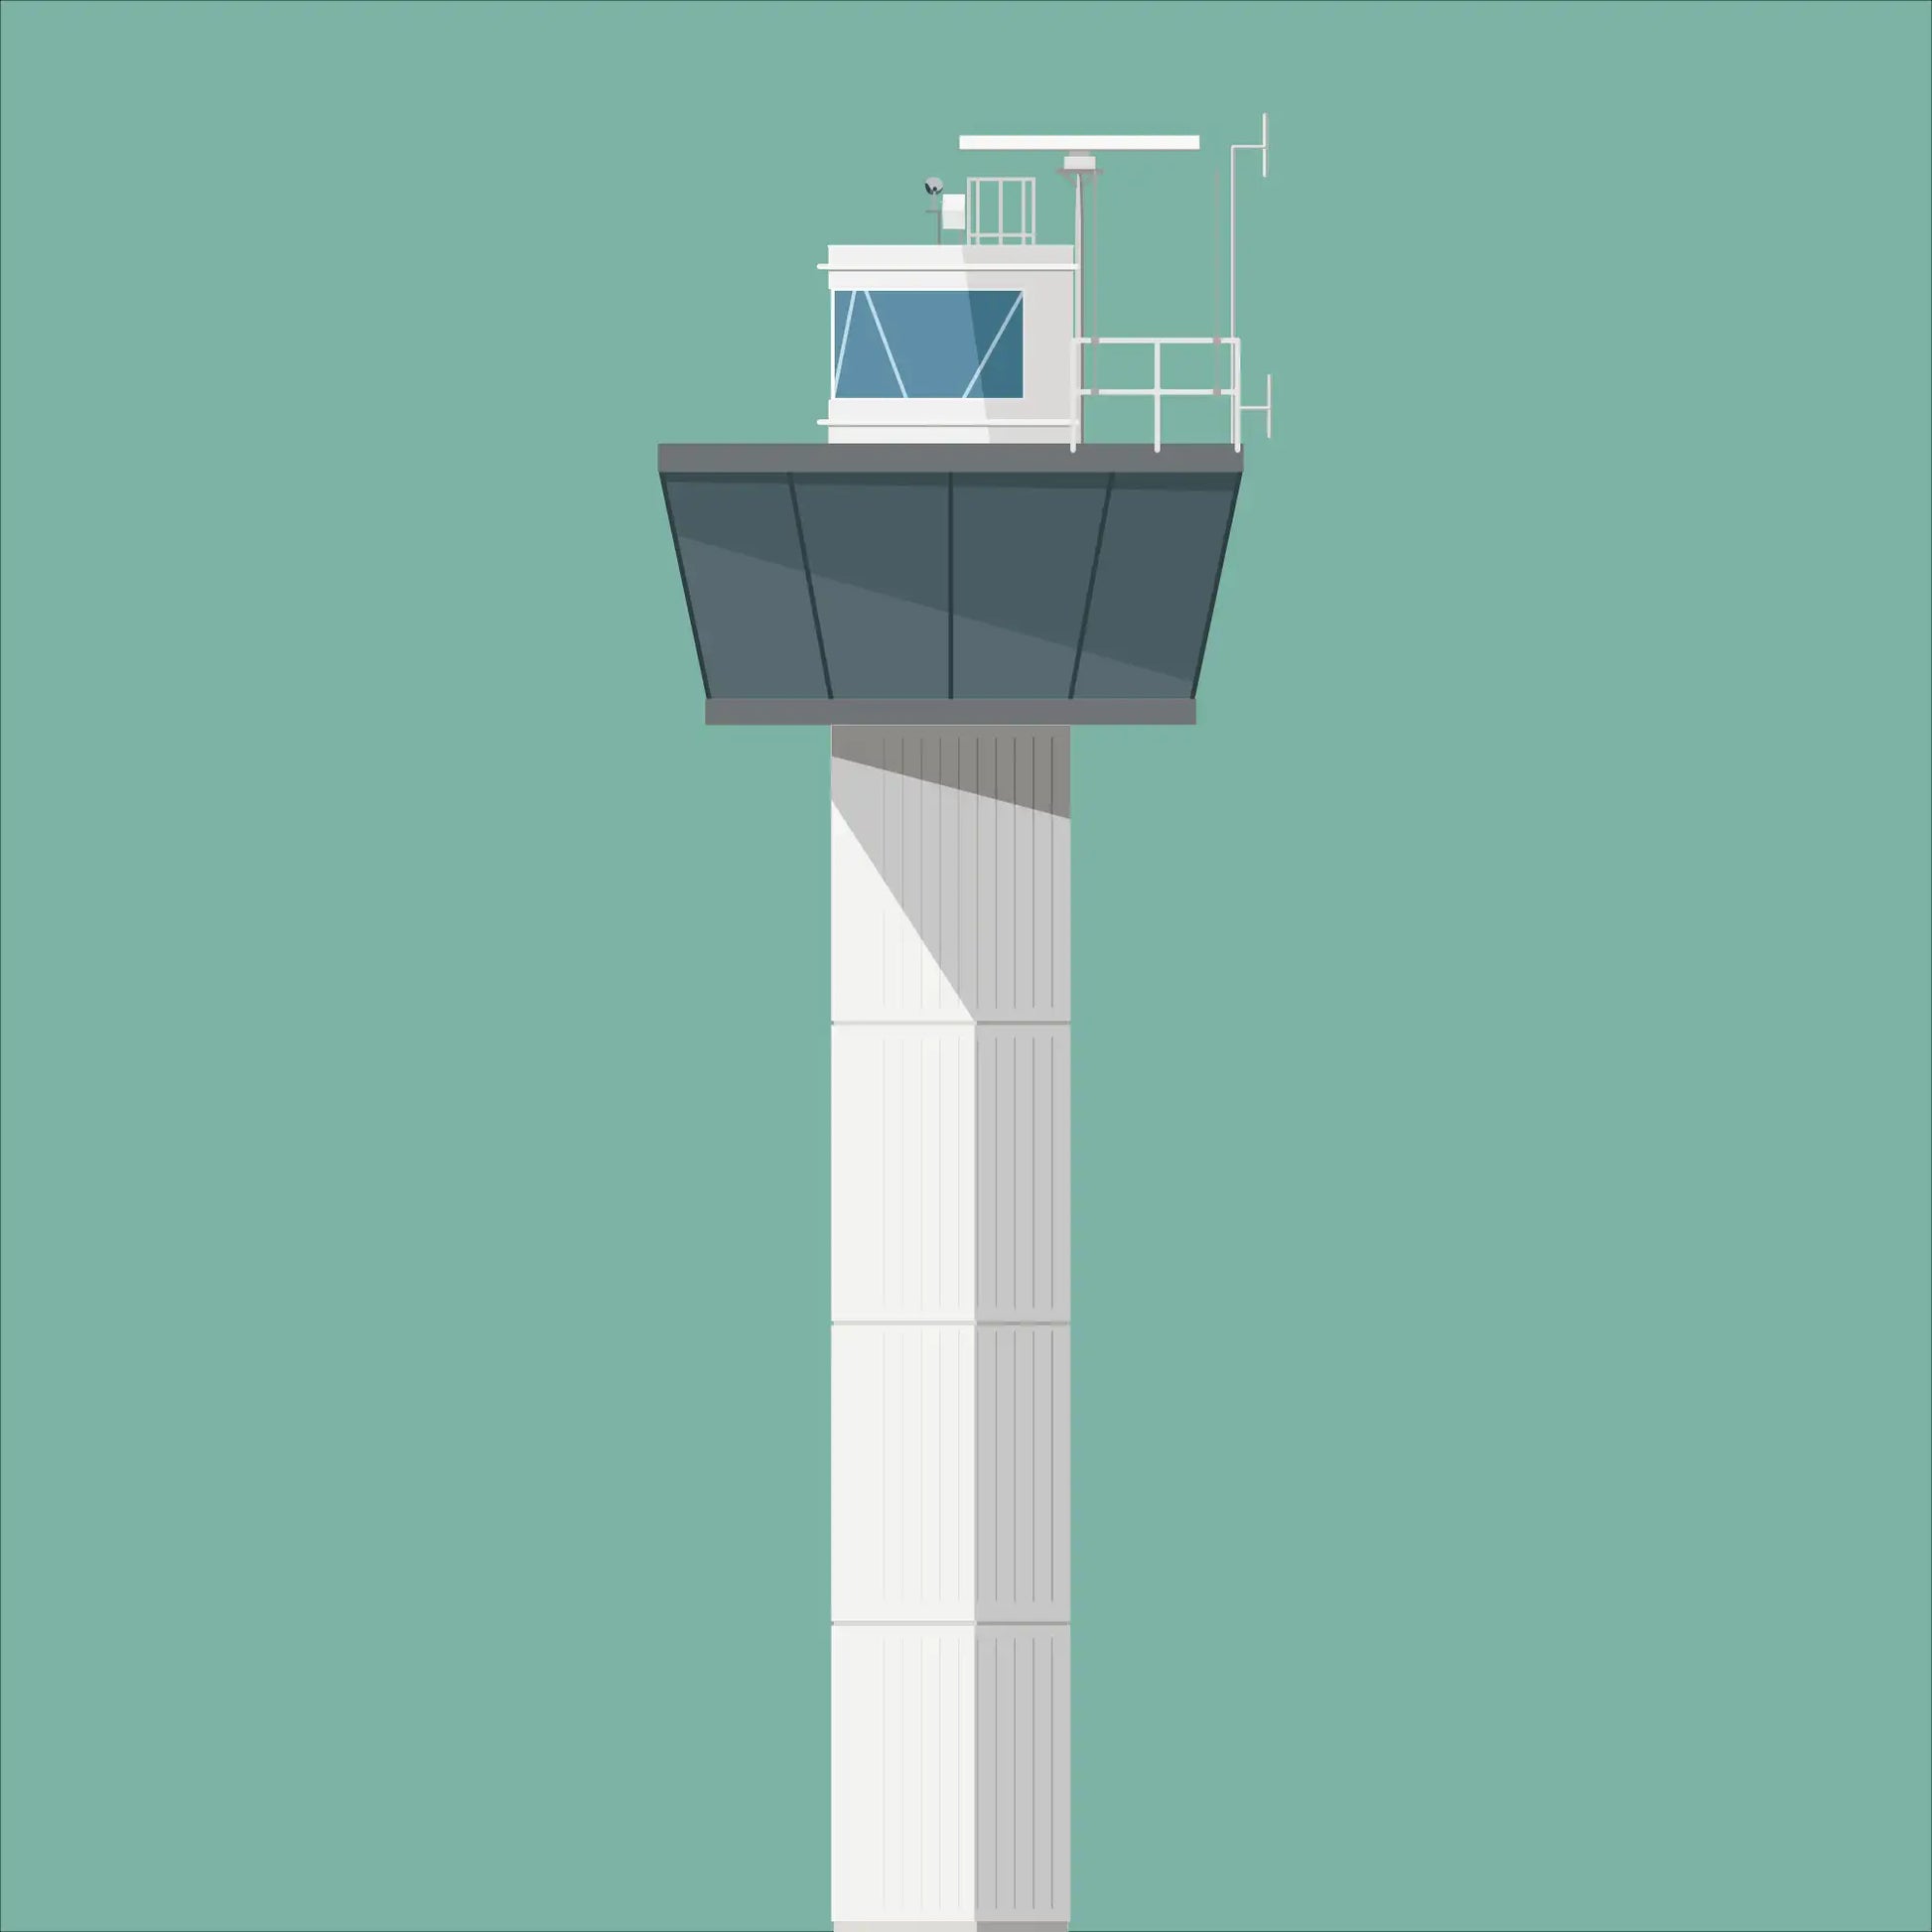 Contemporary graphic illustration of Ferris Point lighthouse on a white background inside light blue square.